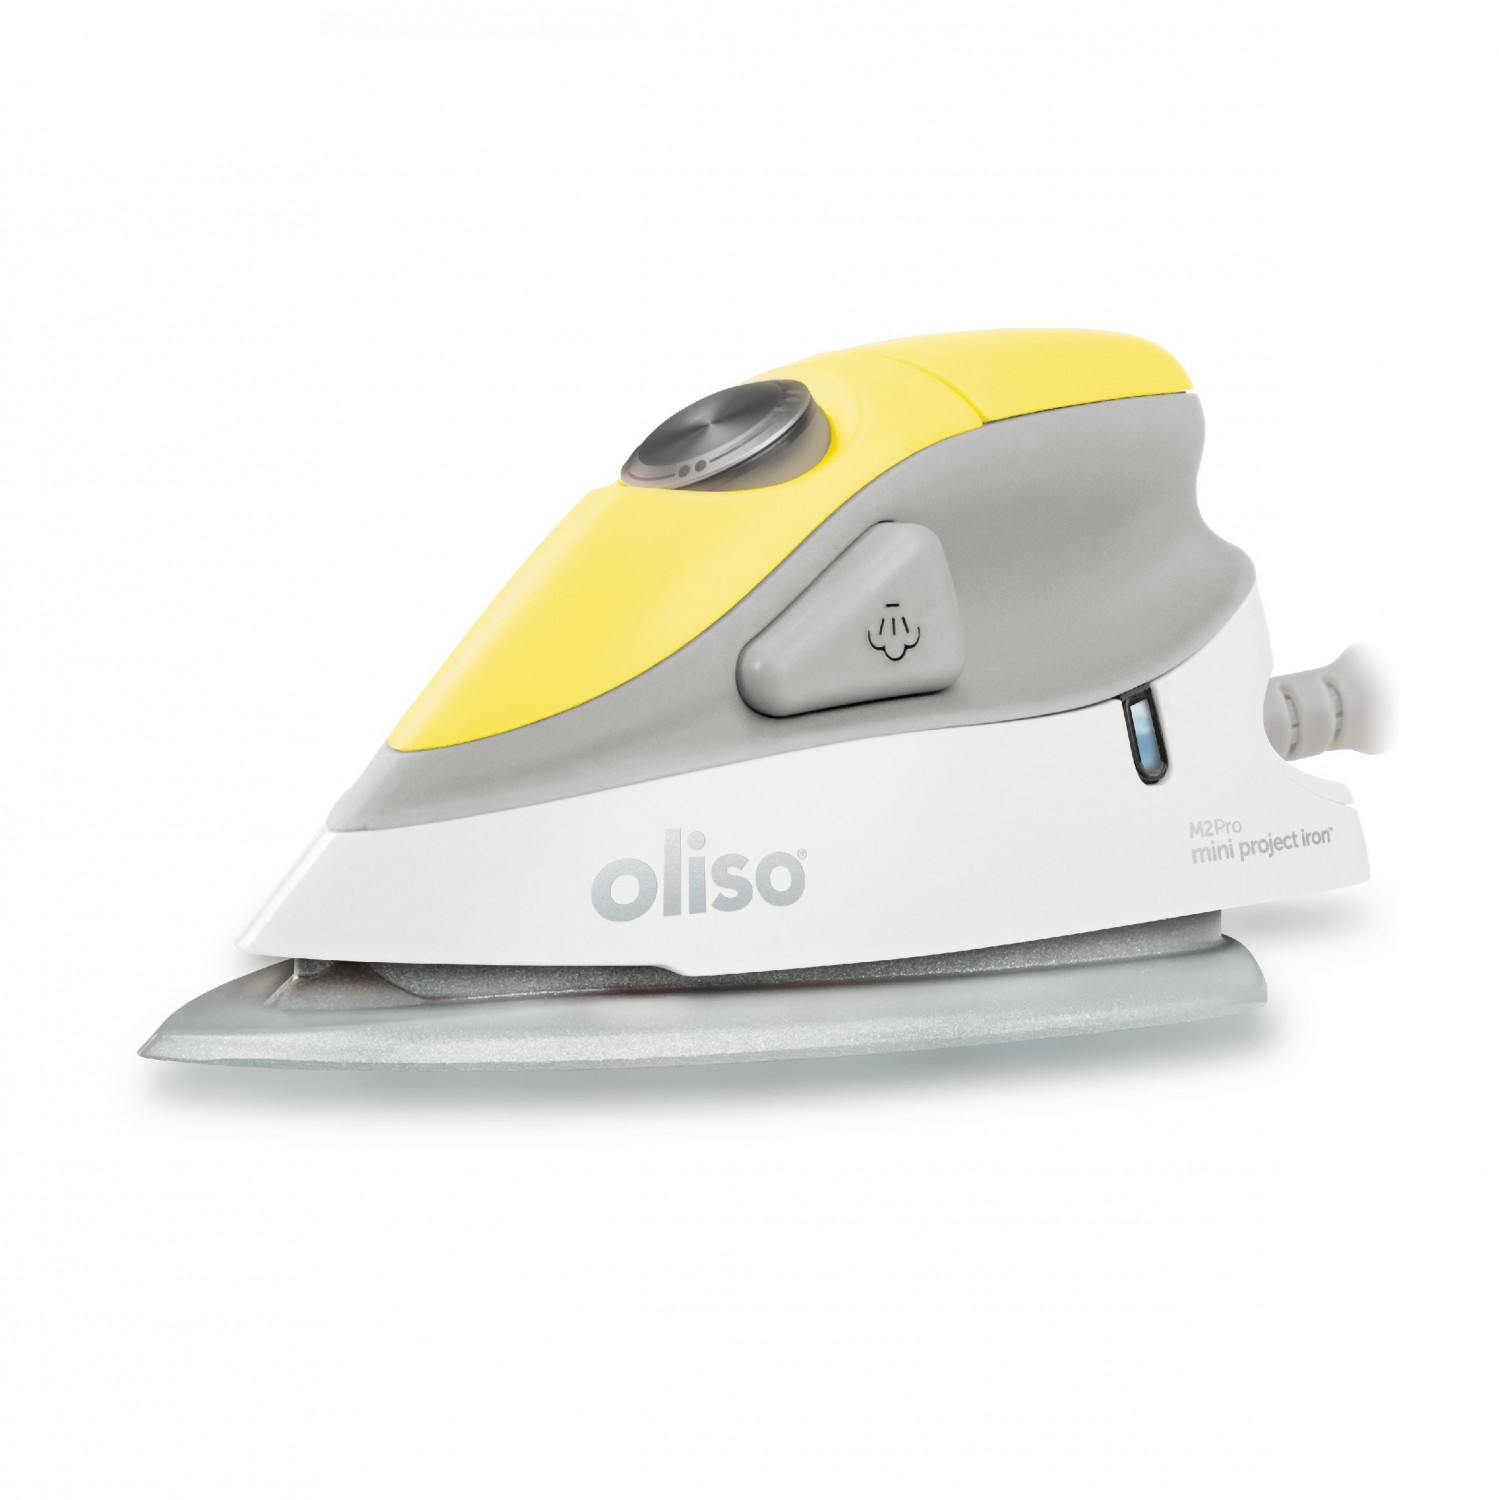 OLISO MINI IRON WITH TRIVET CORAL – Calico Gals